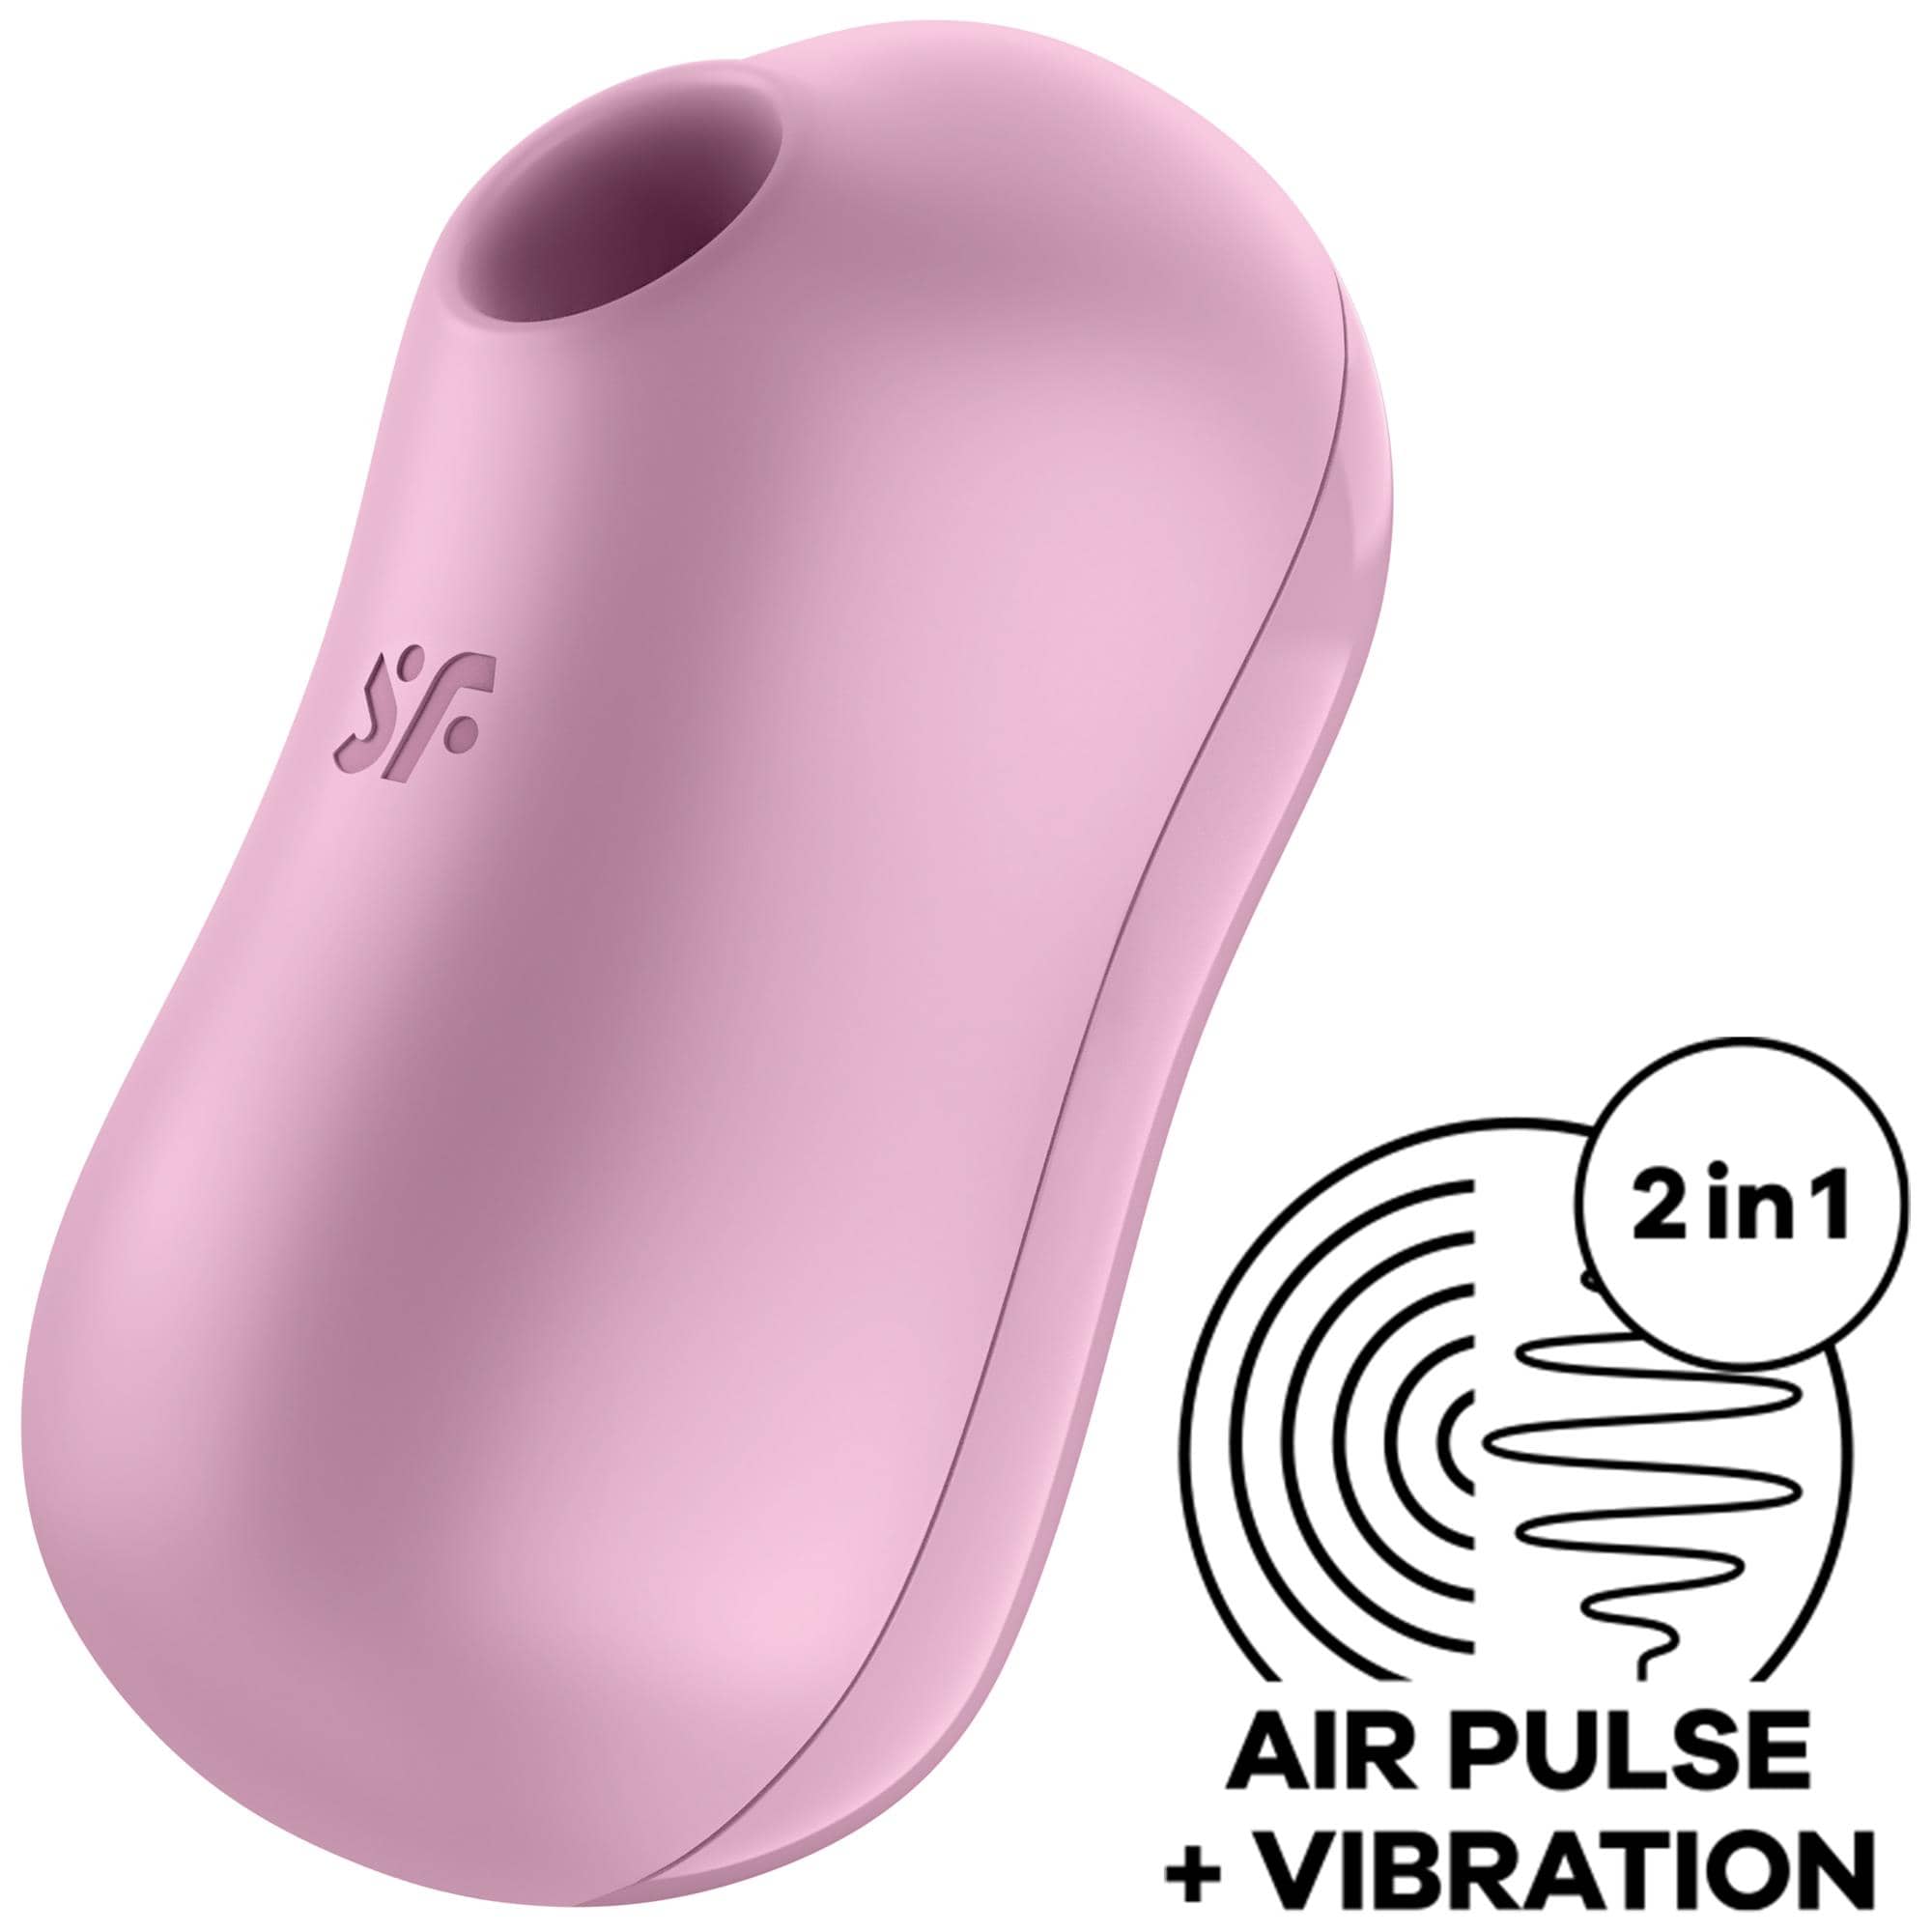 Satisfyer Cotton Candy Lilac